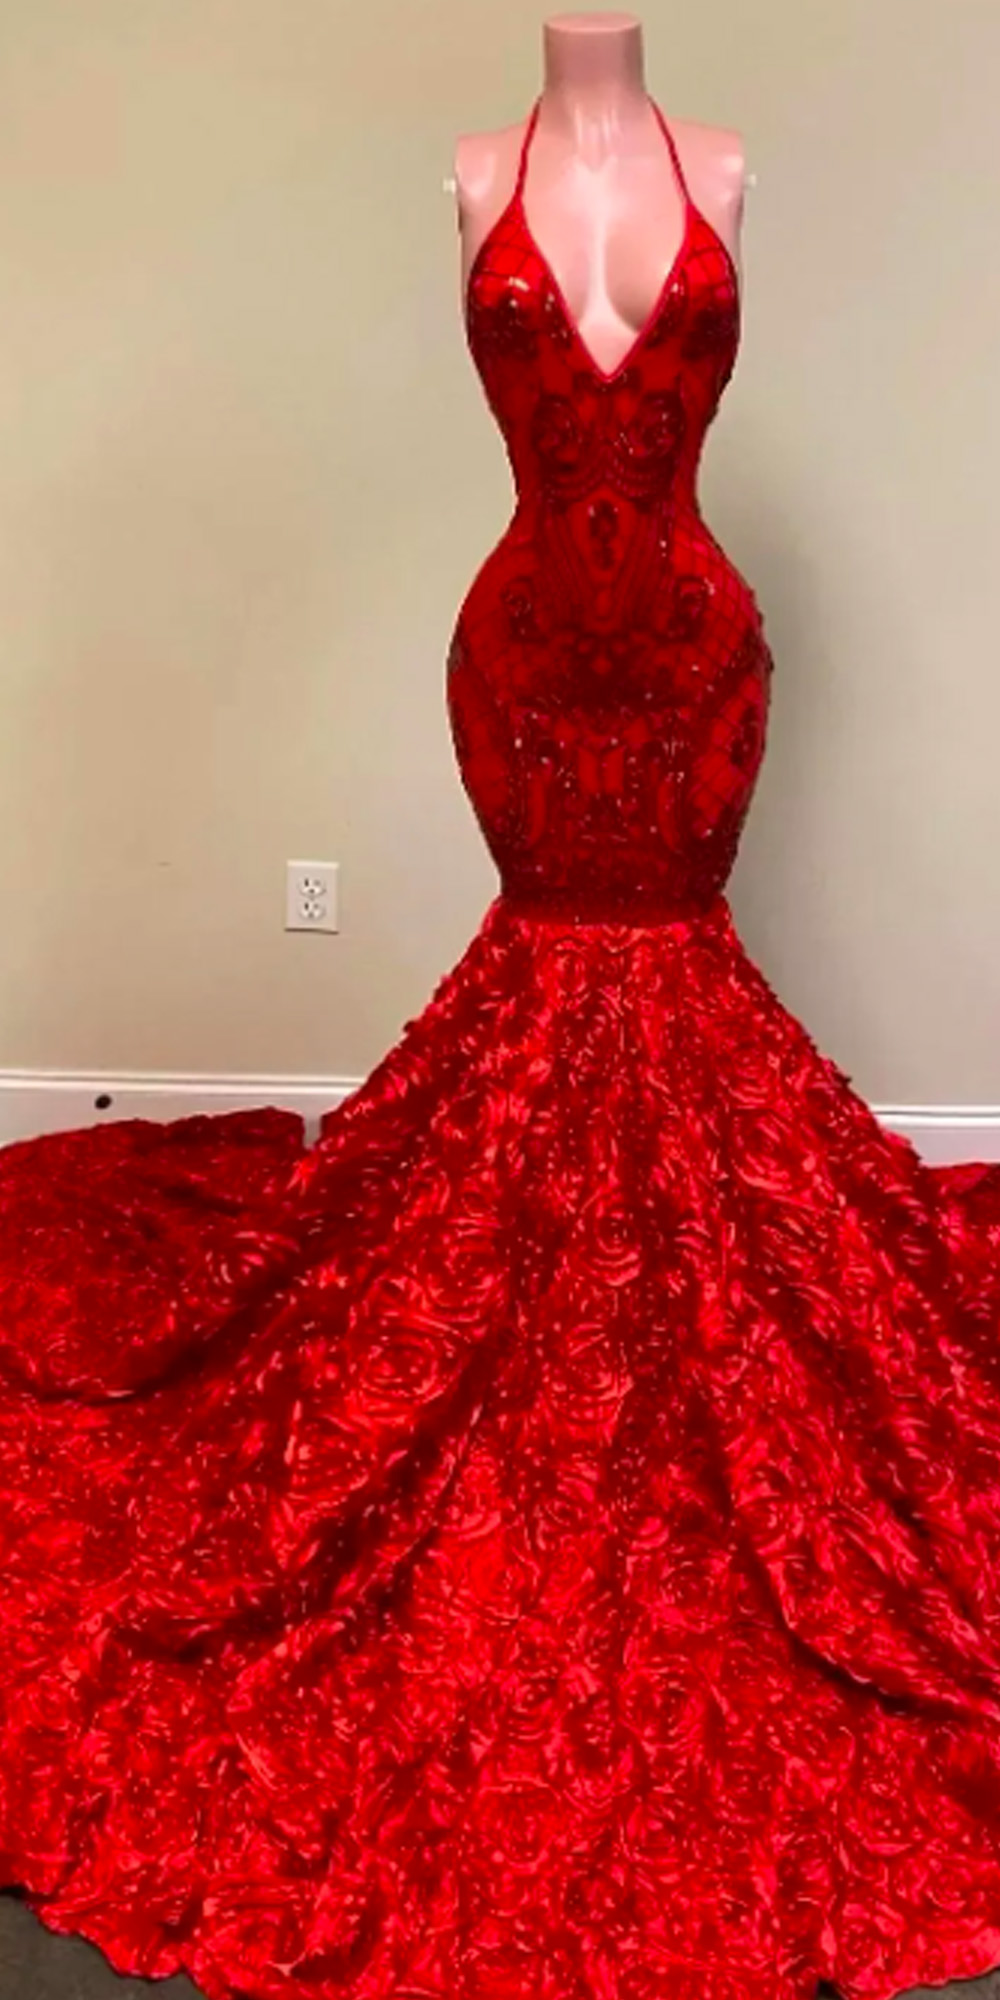 2024 Sexy Backless Red Evening Dresses Halter Deep V Neck Lace Appliques Mermaid Prom Dress Rose Ruffles Special Occasion Party Gowns